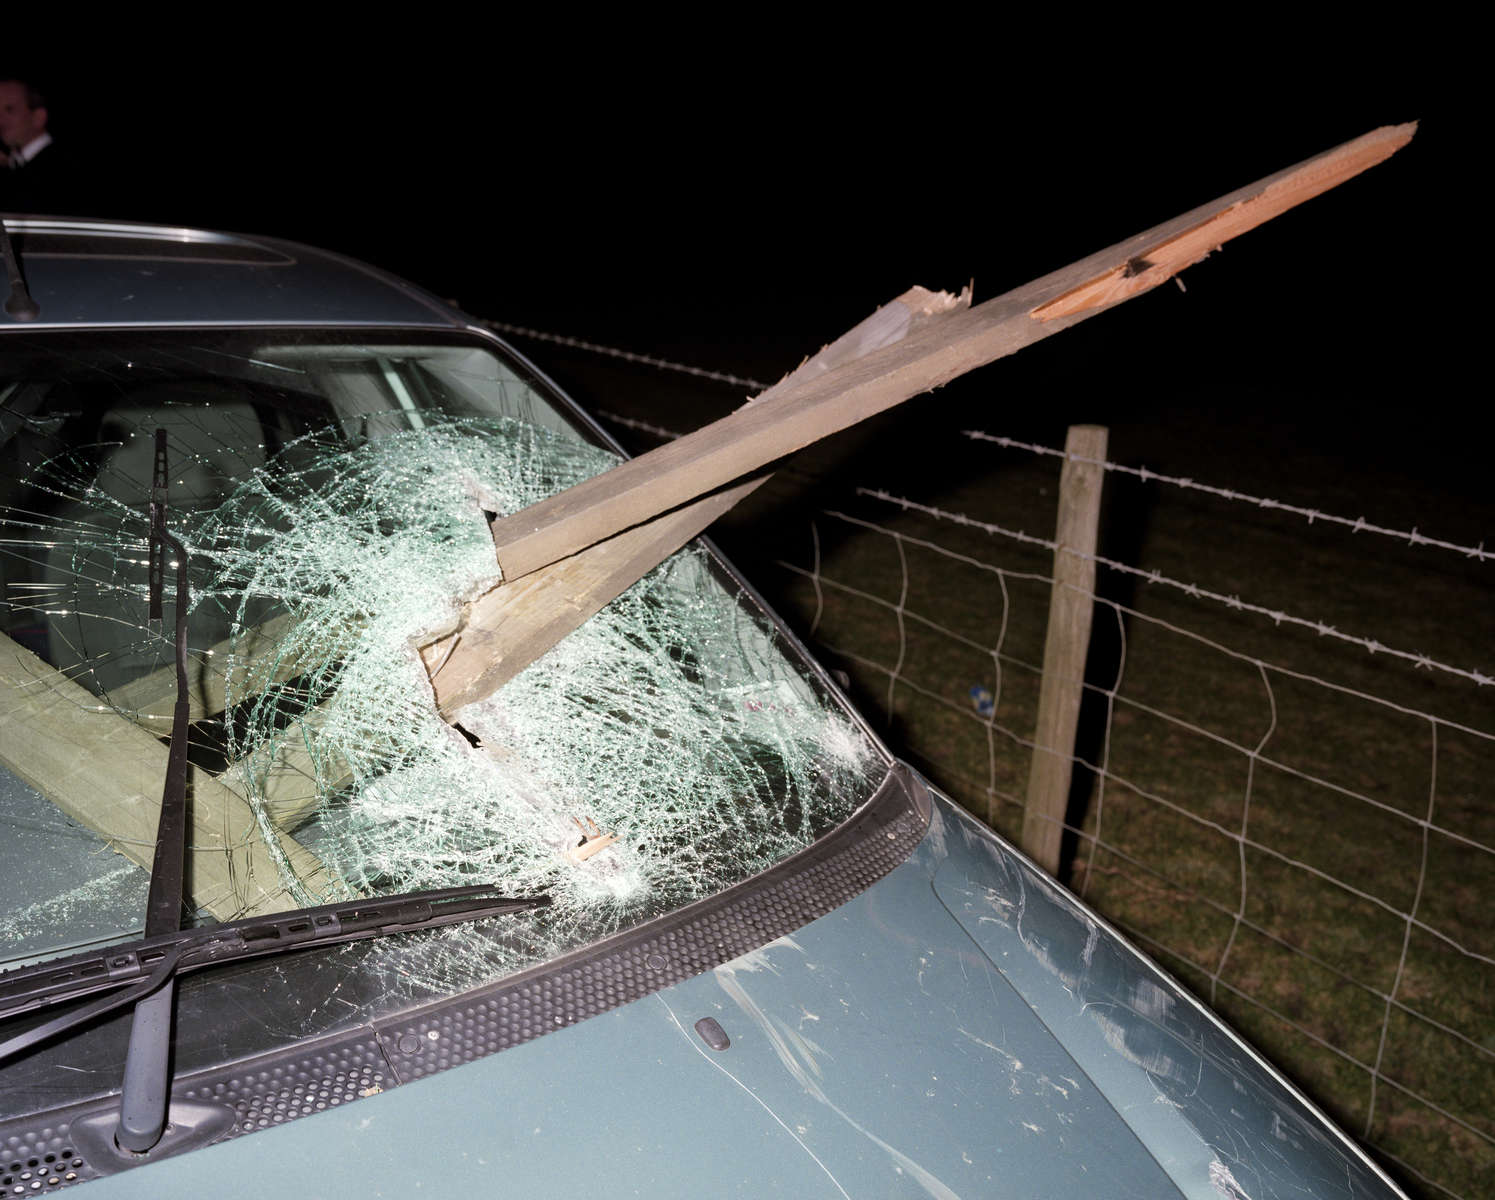 Near Bristol a car has crashed into a fence on a country road; the driver was suspected of being under the influence of alcohol. November 2001